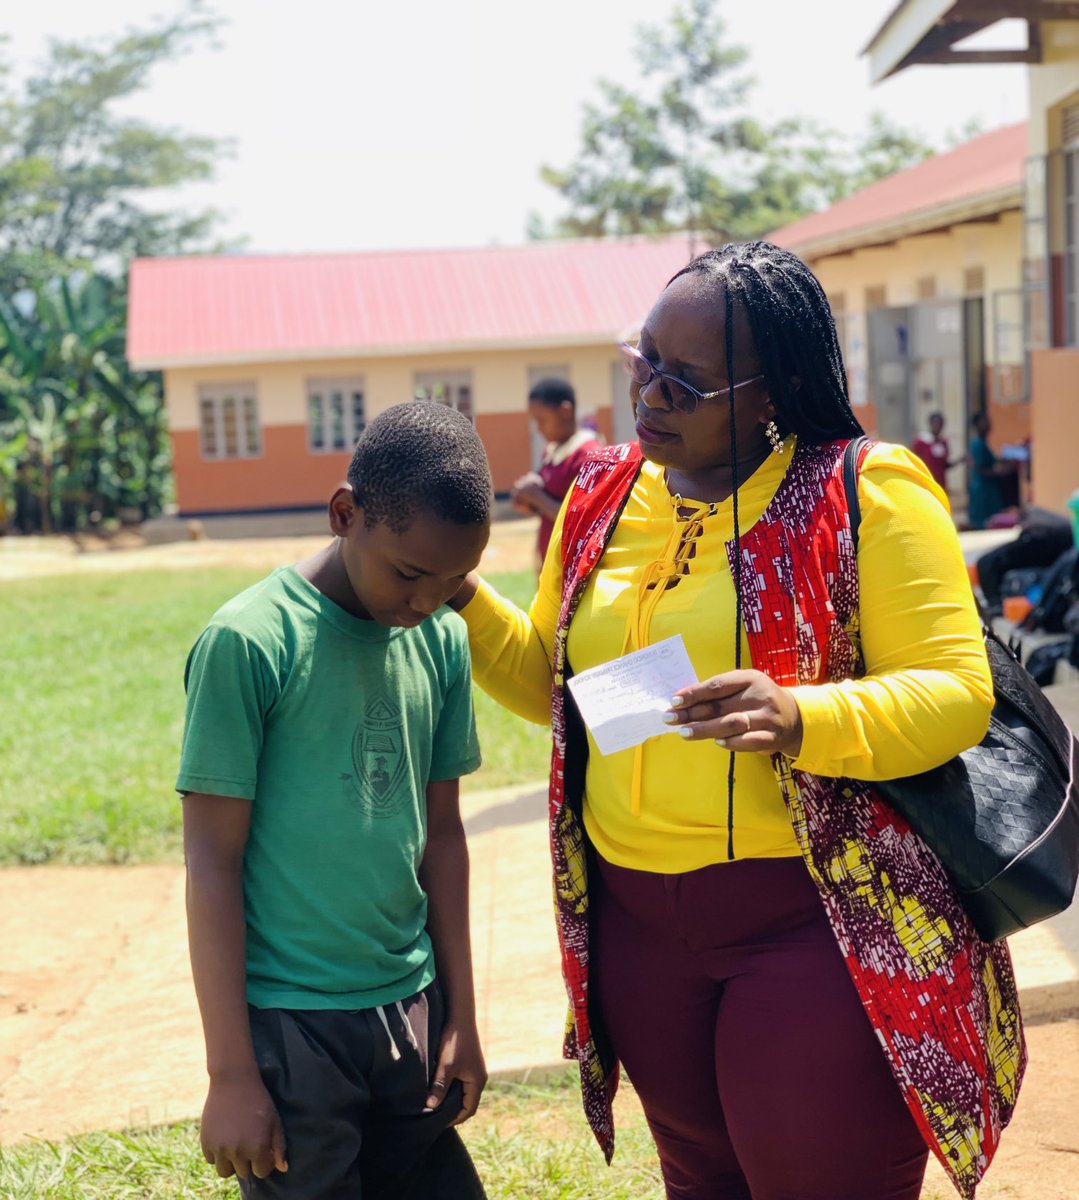 I w’d like to propose @Nankunda20 as a nominee due to her unwavering dedication to the movement to #EndChildMarriage Over the years, we've witnessed significant strides in various communities, all thanks to her relentless efforts.She's the visionary behind @RaisingTeensUg1.